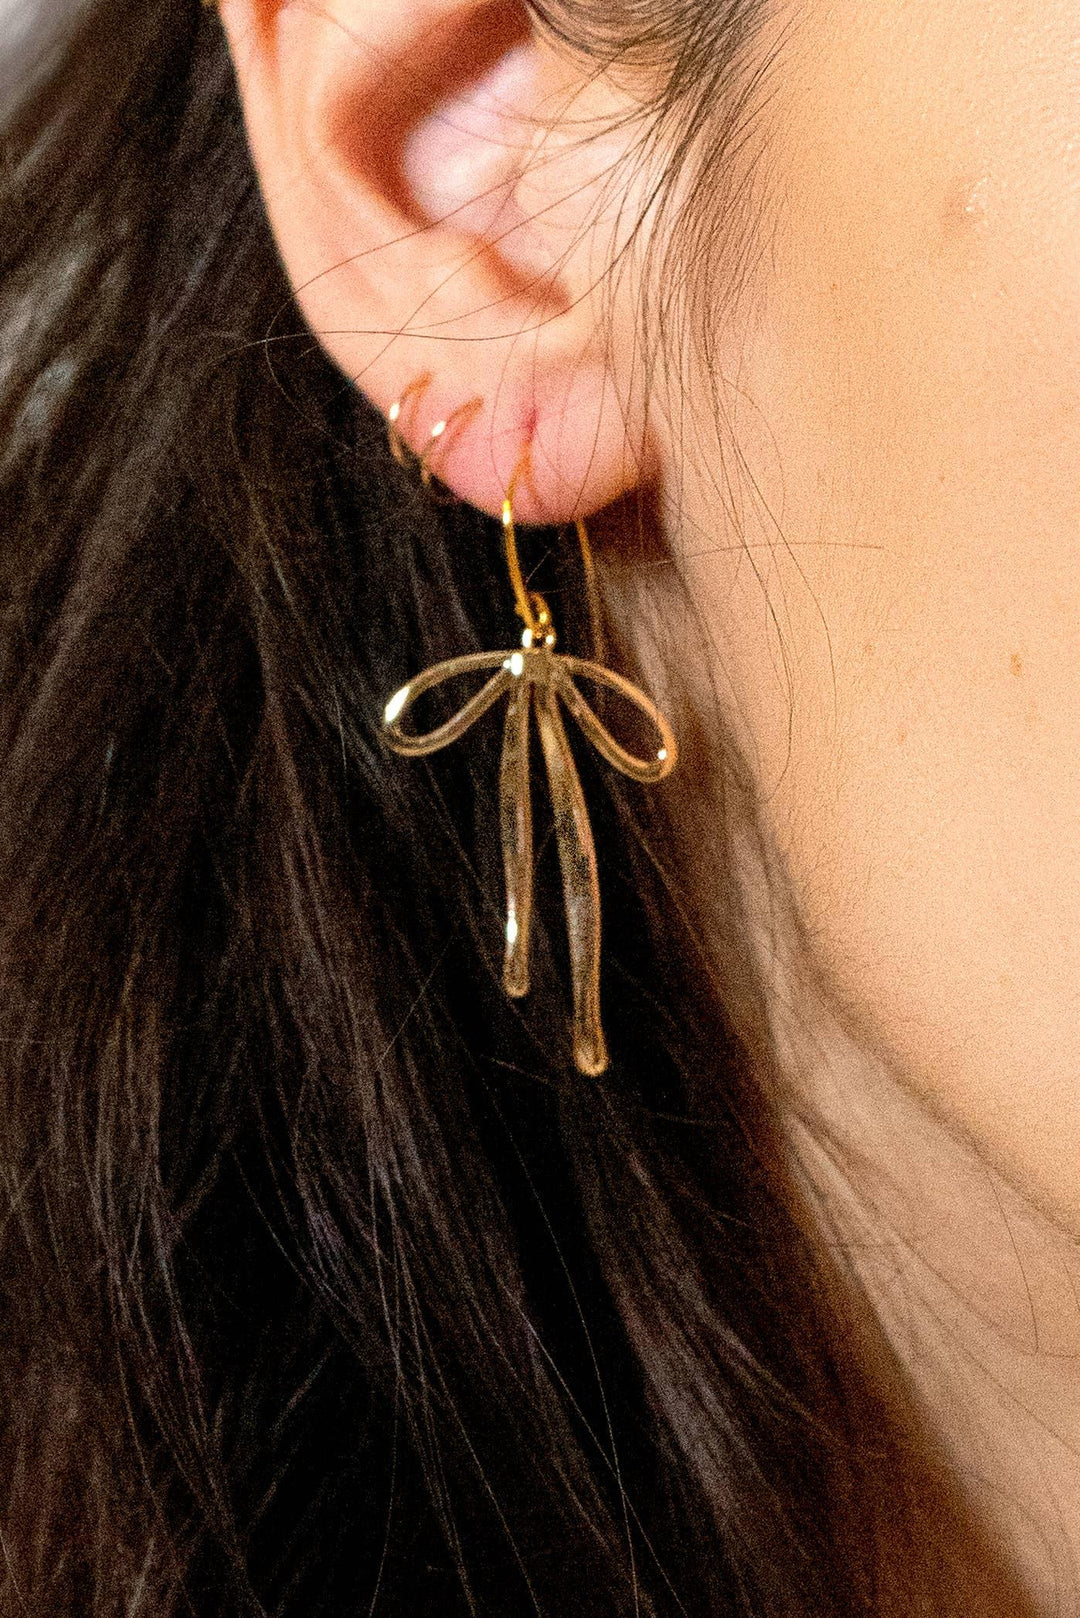 Bad to the bow Earrings - Esme and Elodie